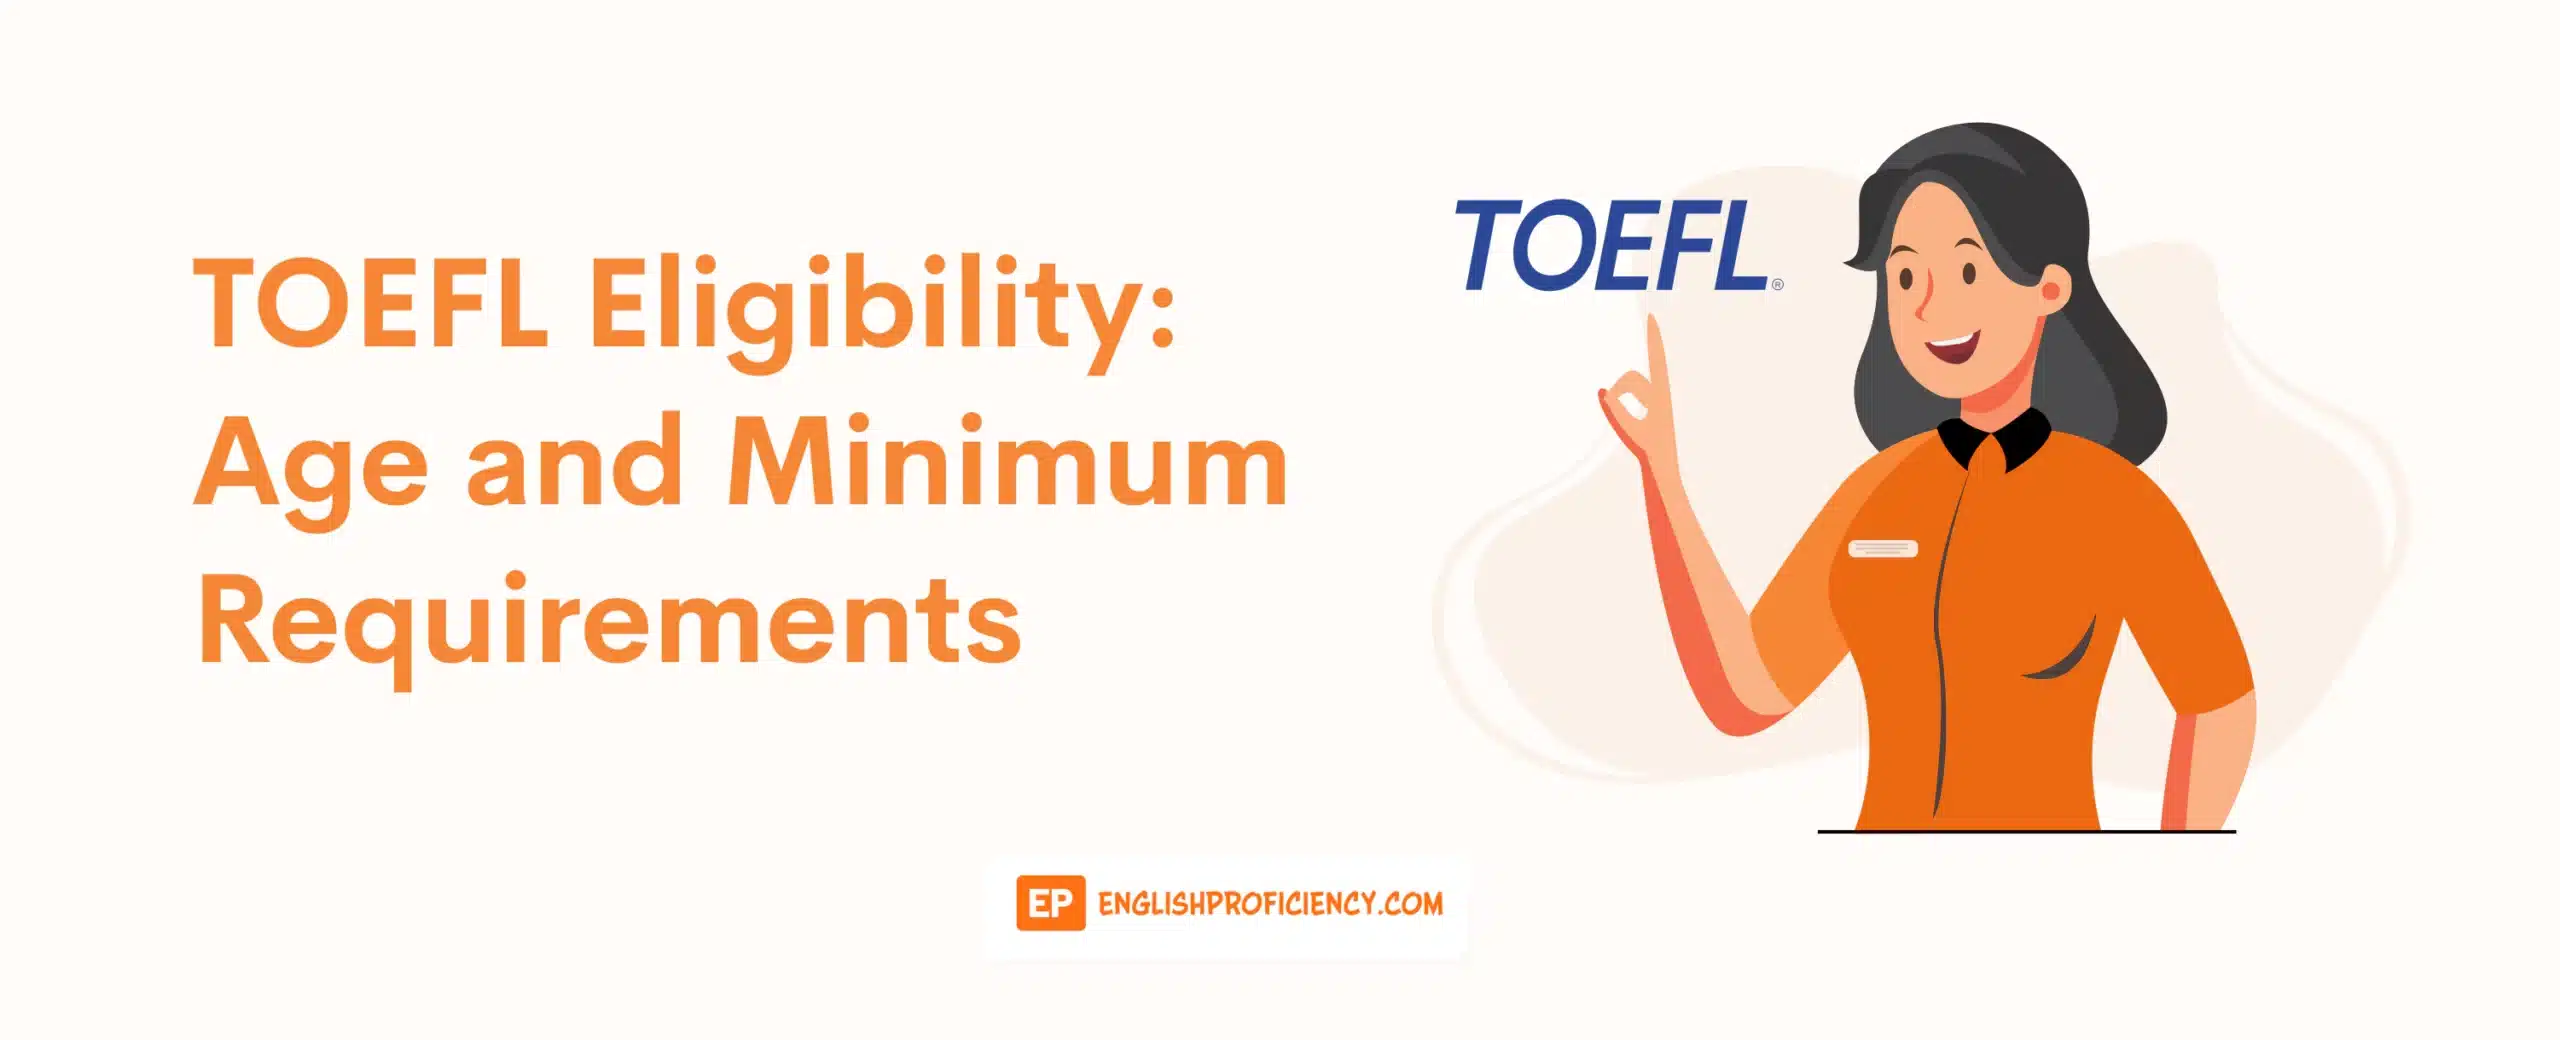 TOEFL Eligibility Age and Minimum Requirements